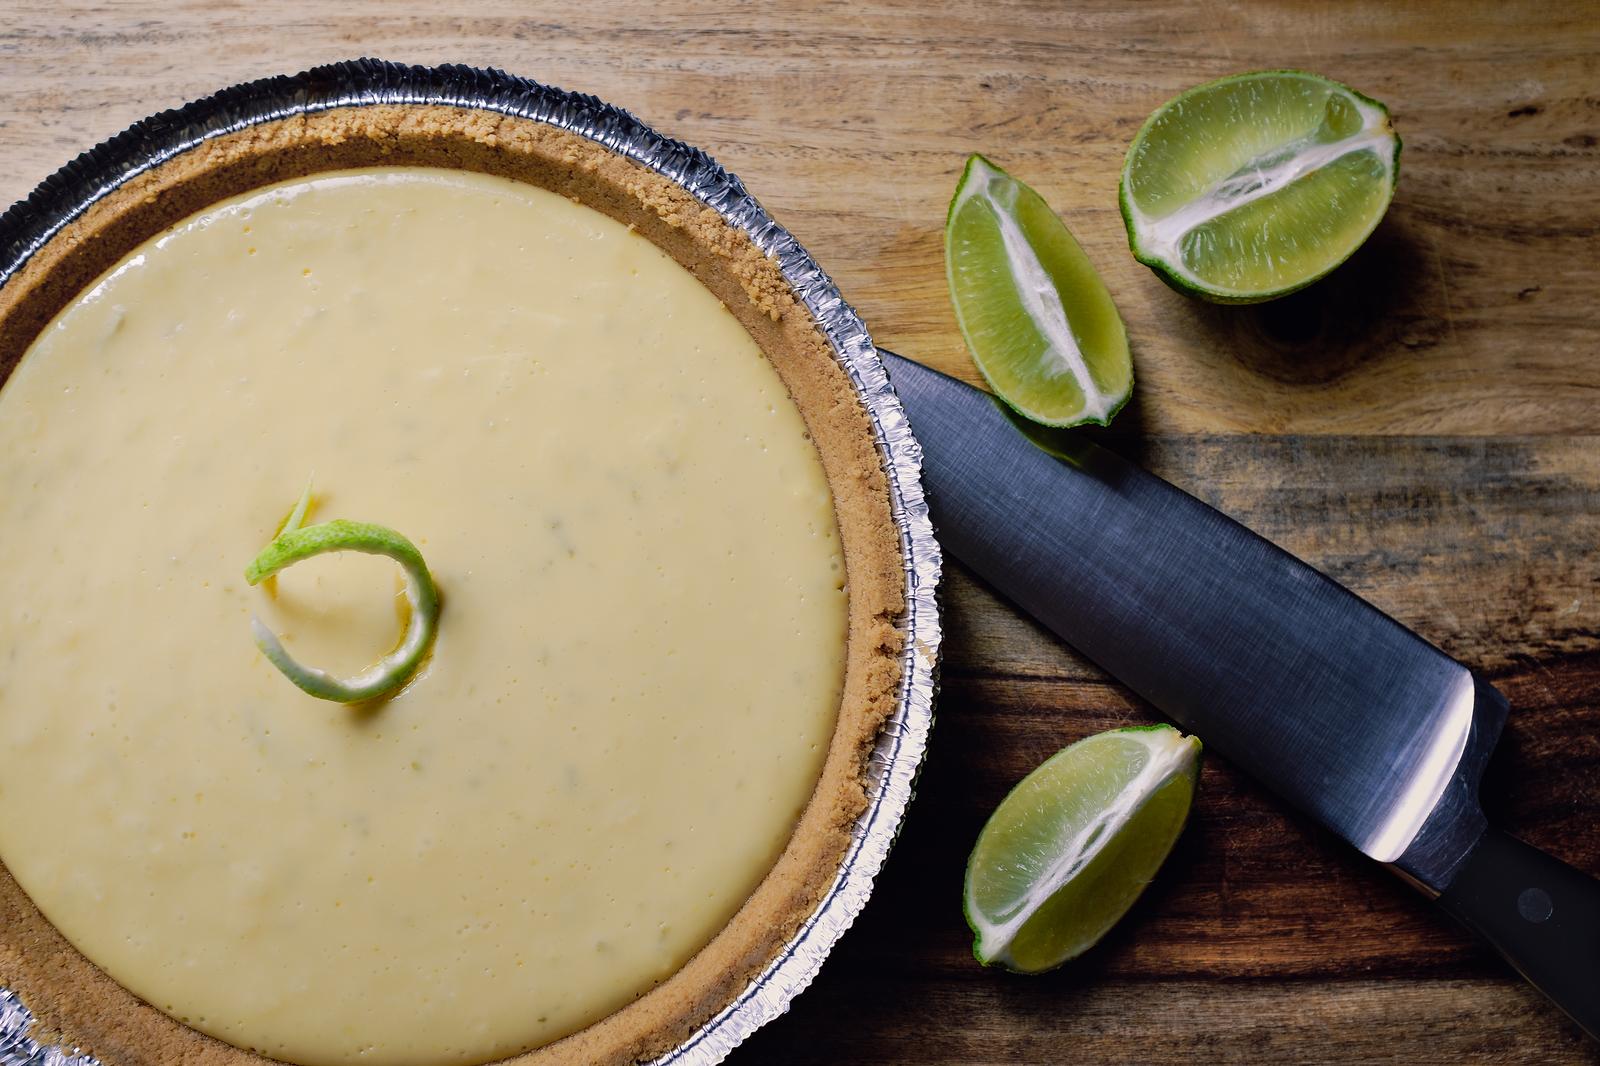 🌮 Eat an International Food for Every Letter of the Alphabet If You Want Us to Guess Your Generation Key lime pie